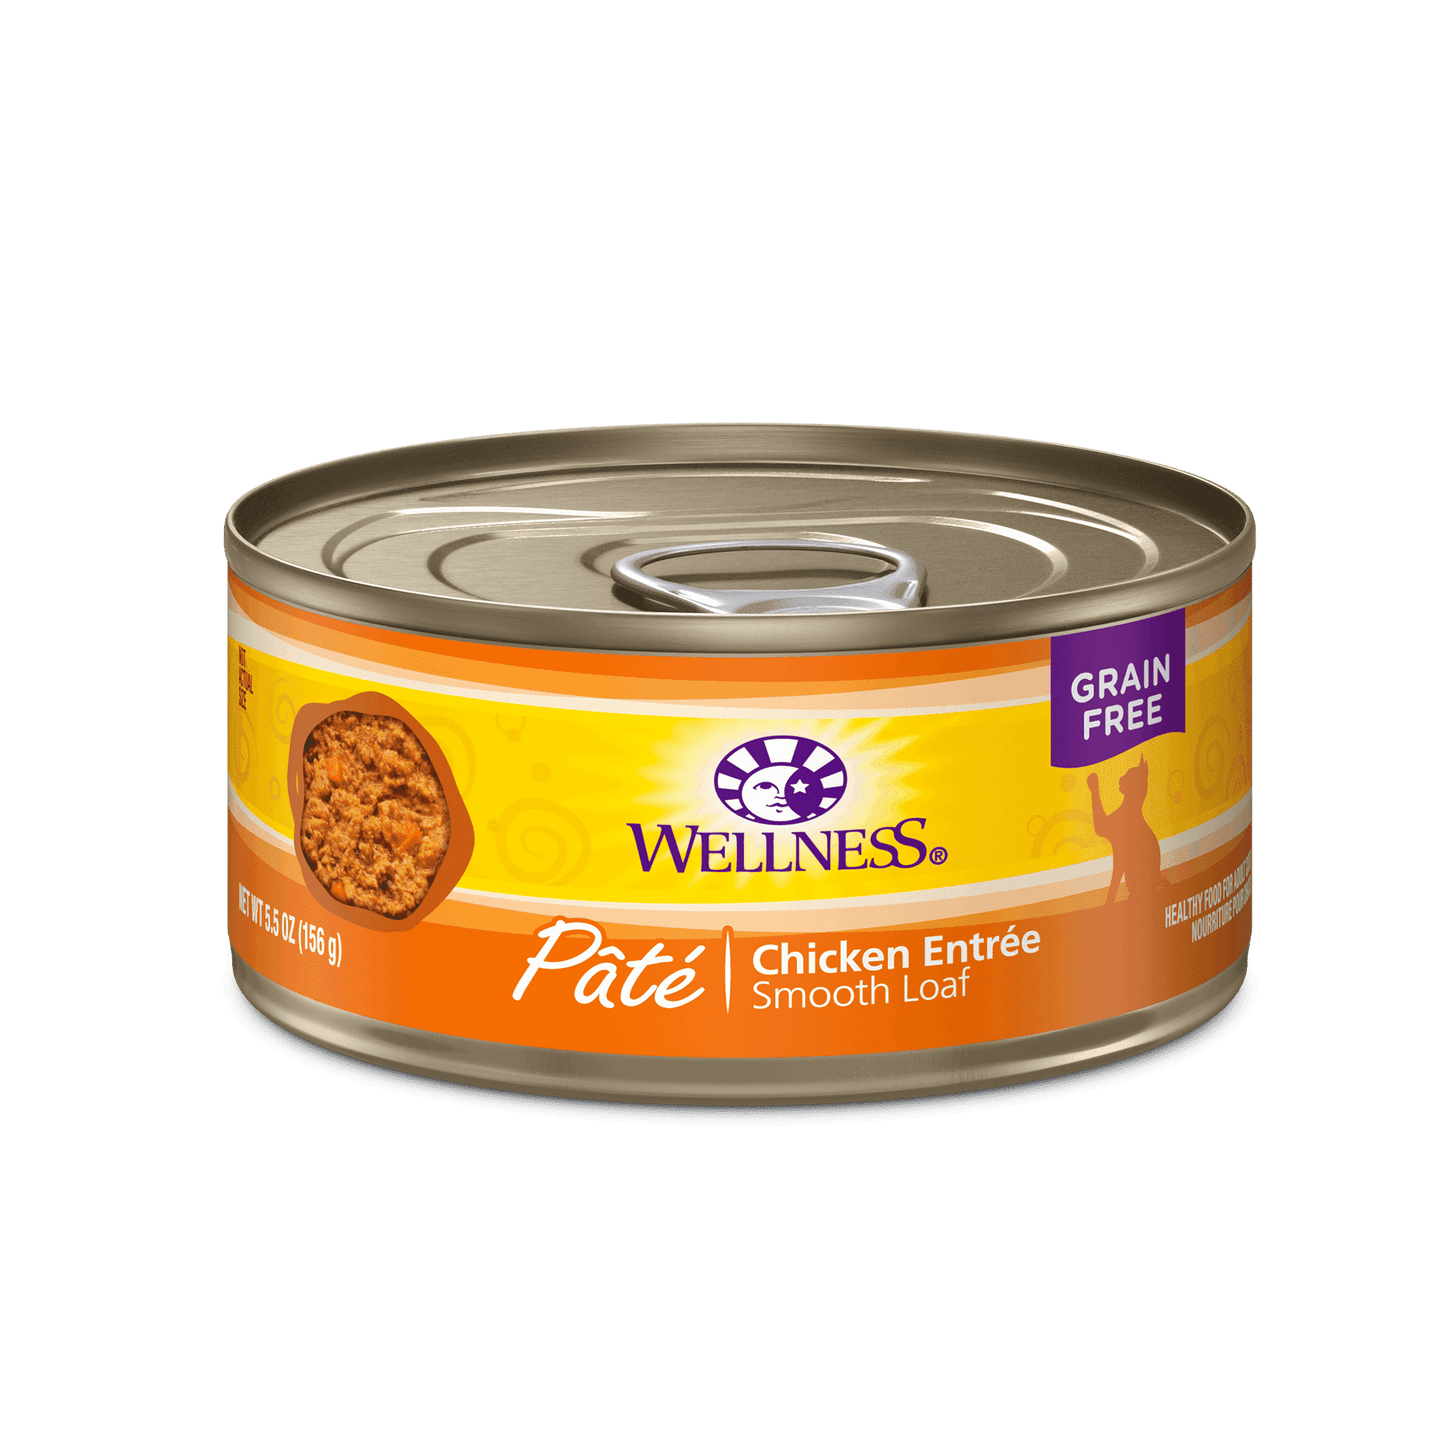 Wellness Complete Health Pate Chicken Entree Grain-Free Canned Cat Food 155g Canned Cat Food 155g | PetMax Canada